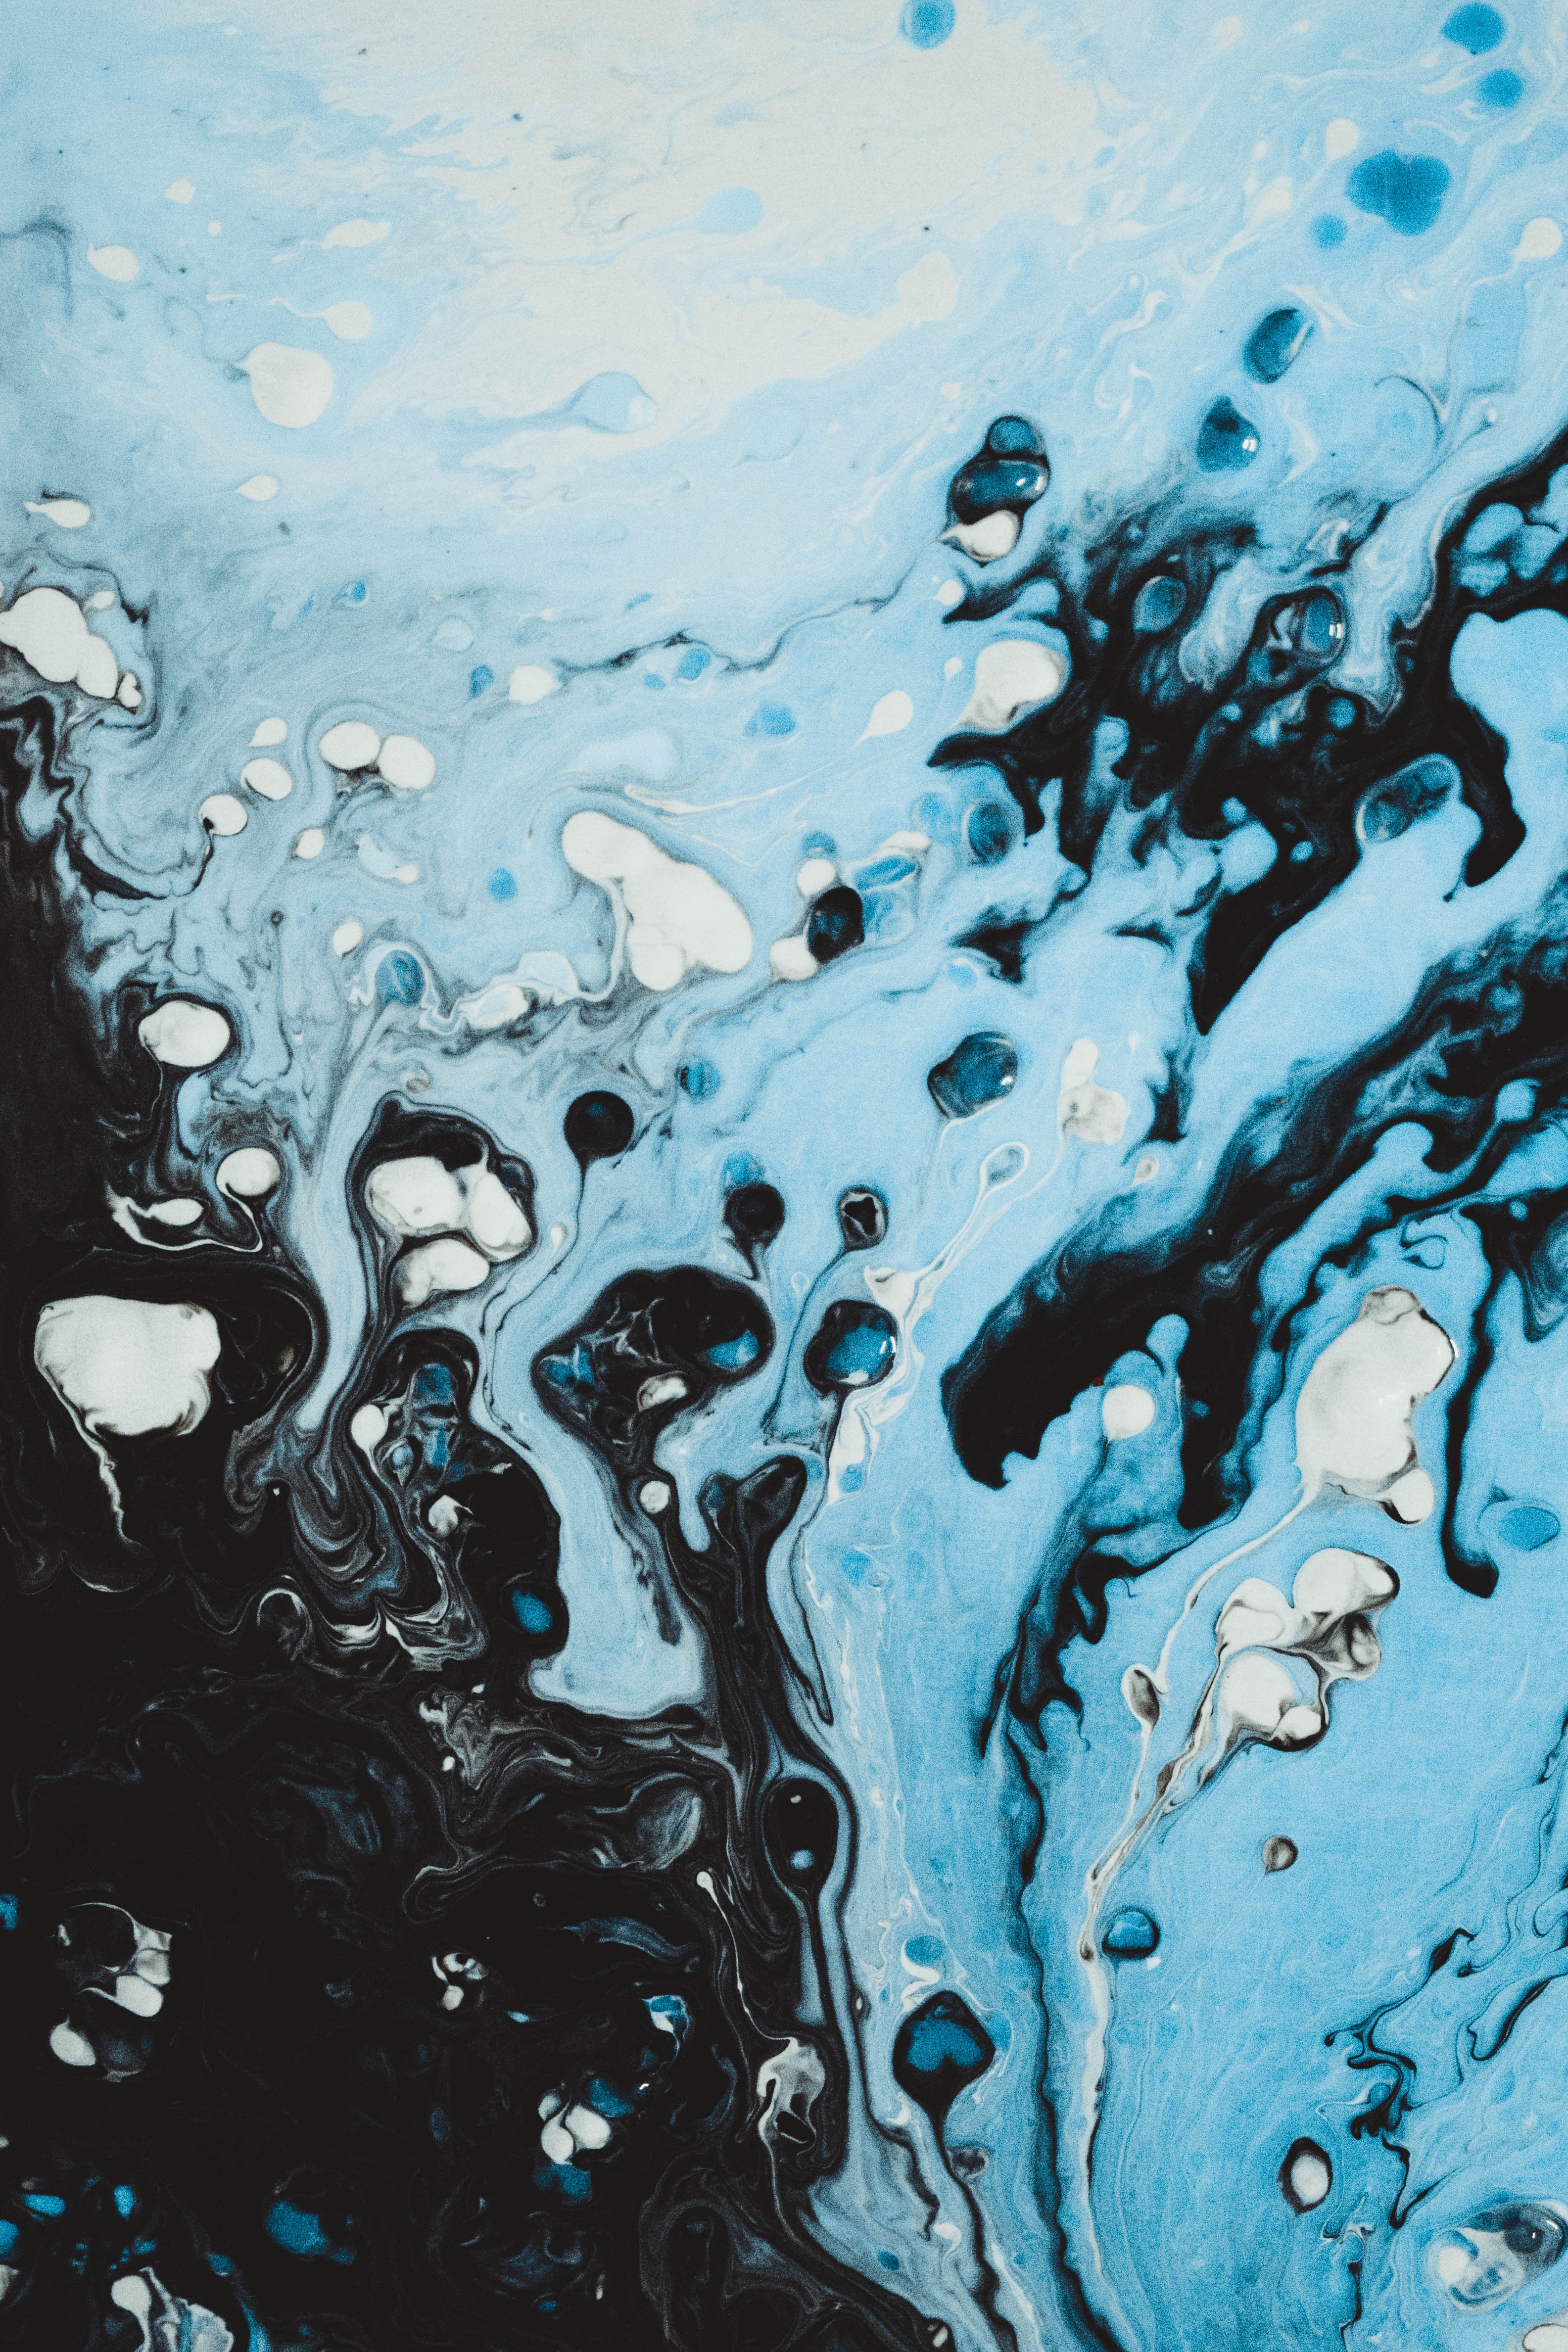 paint, abstract, black, blue, divorces, lines, flow, stains, spots, drips